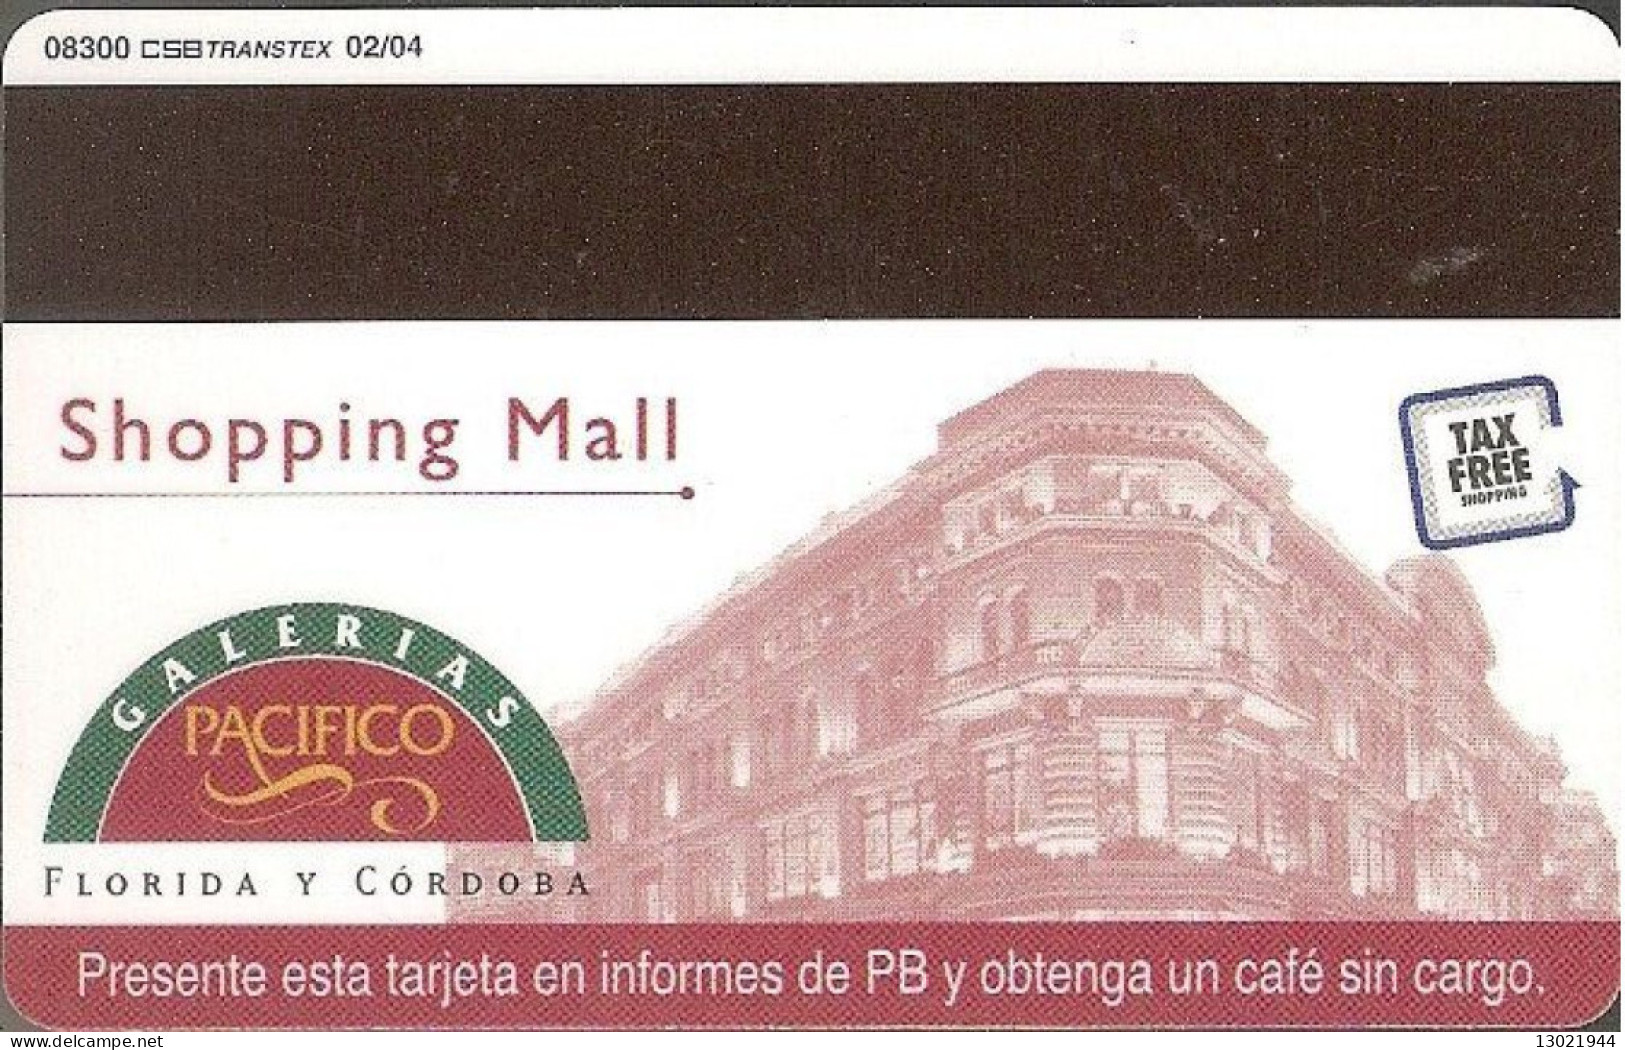 ARGENTINA  KEY HOTEL  Suites Mayflower - BUENOS AIRES - Hotel Keycards